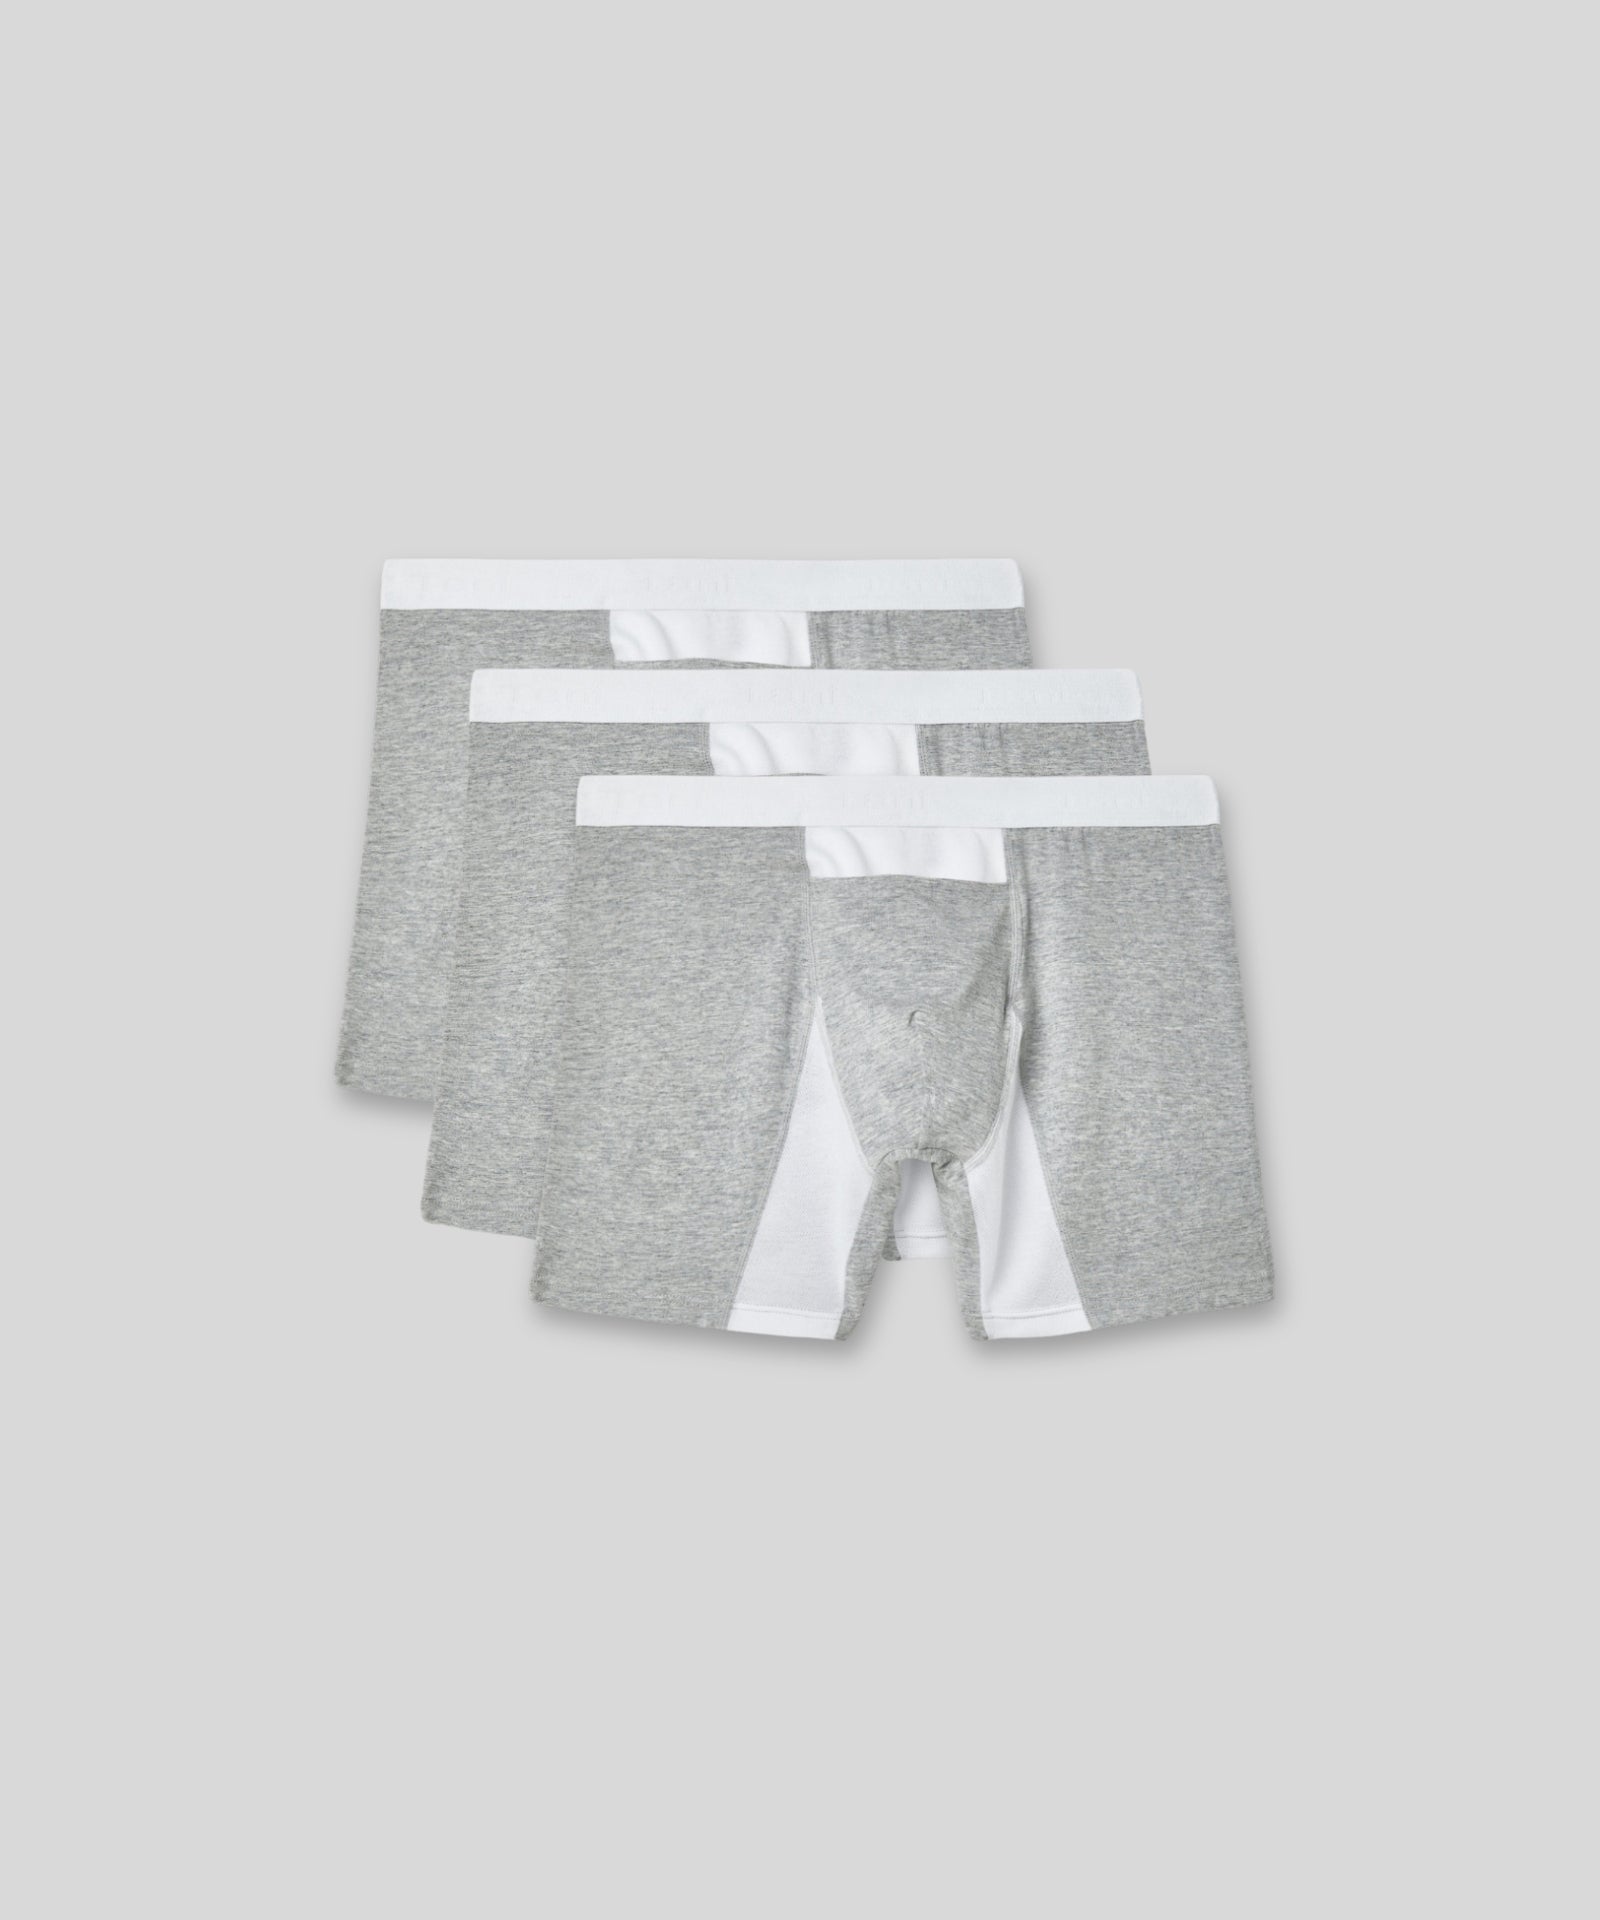 Mens Boxer Brief with Horizontal Fly - 3 Pack